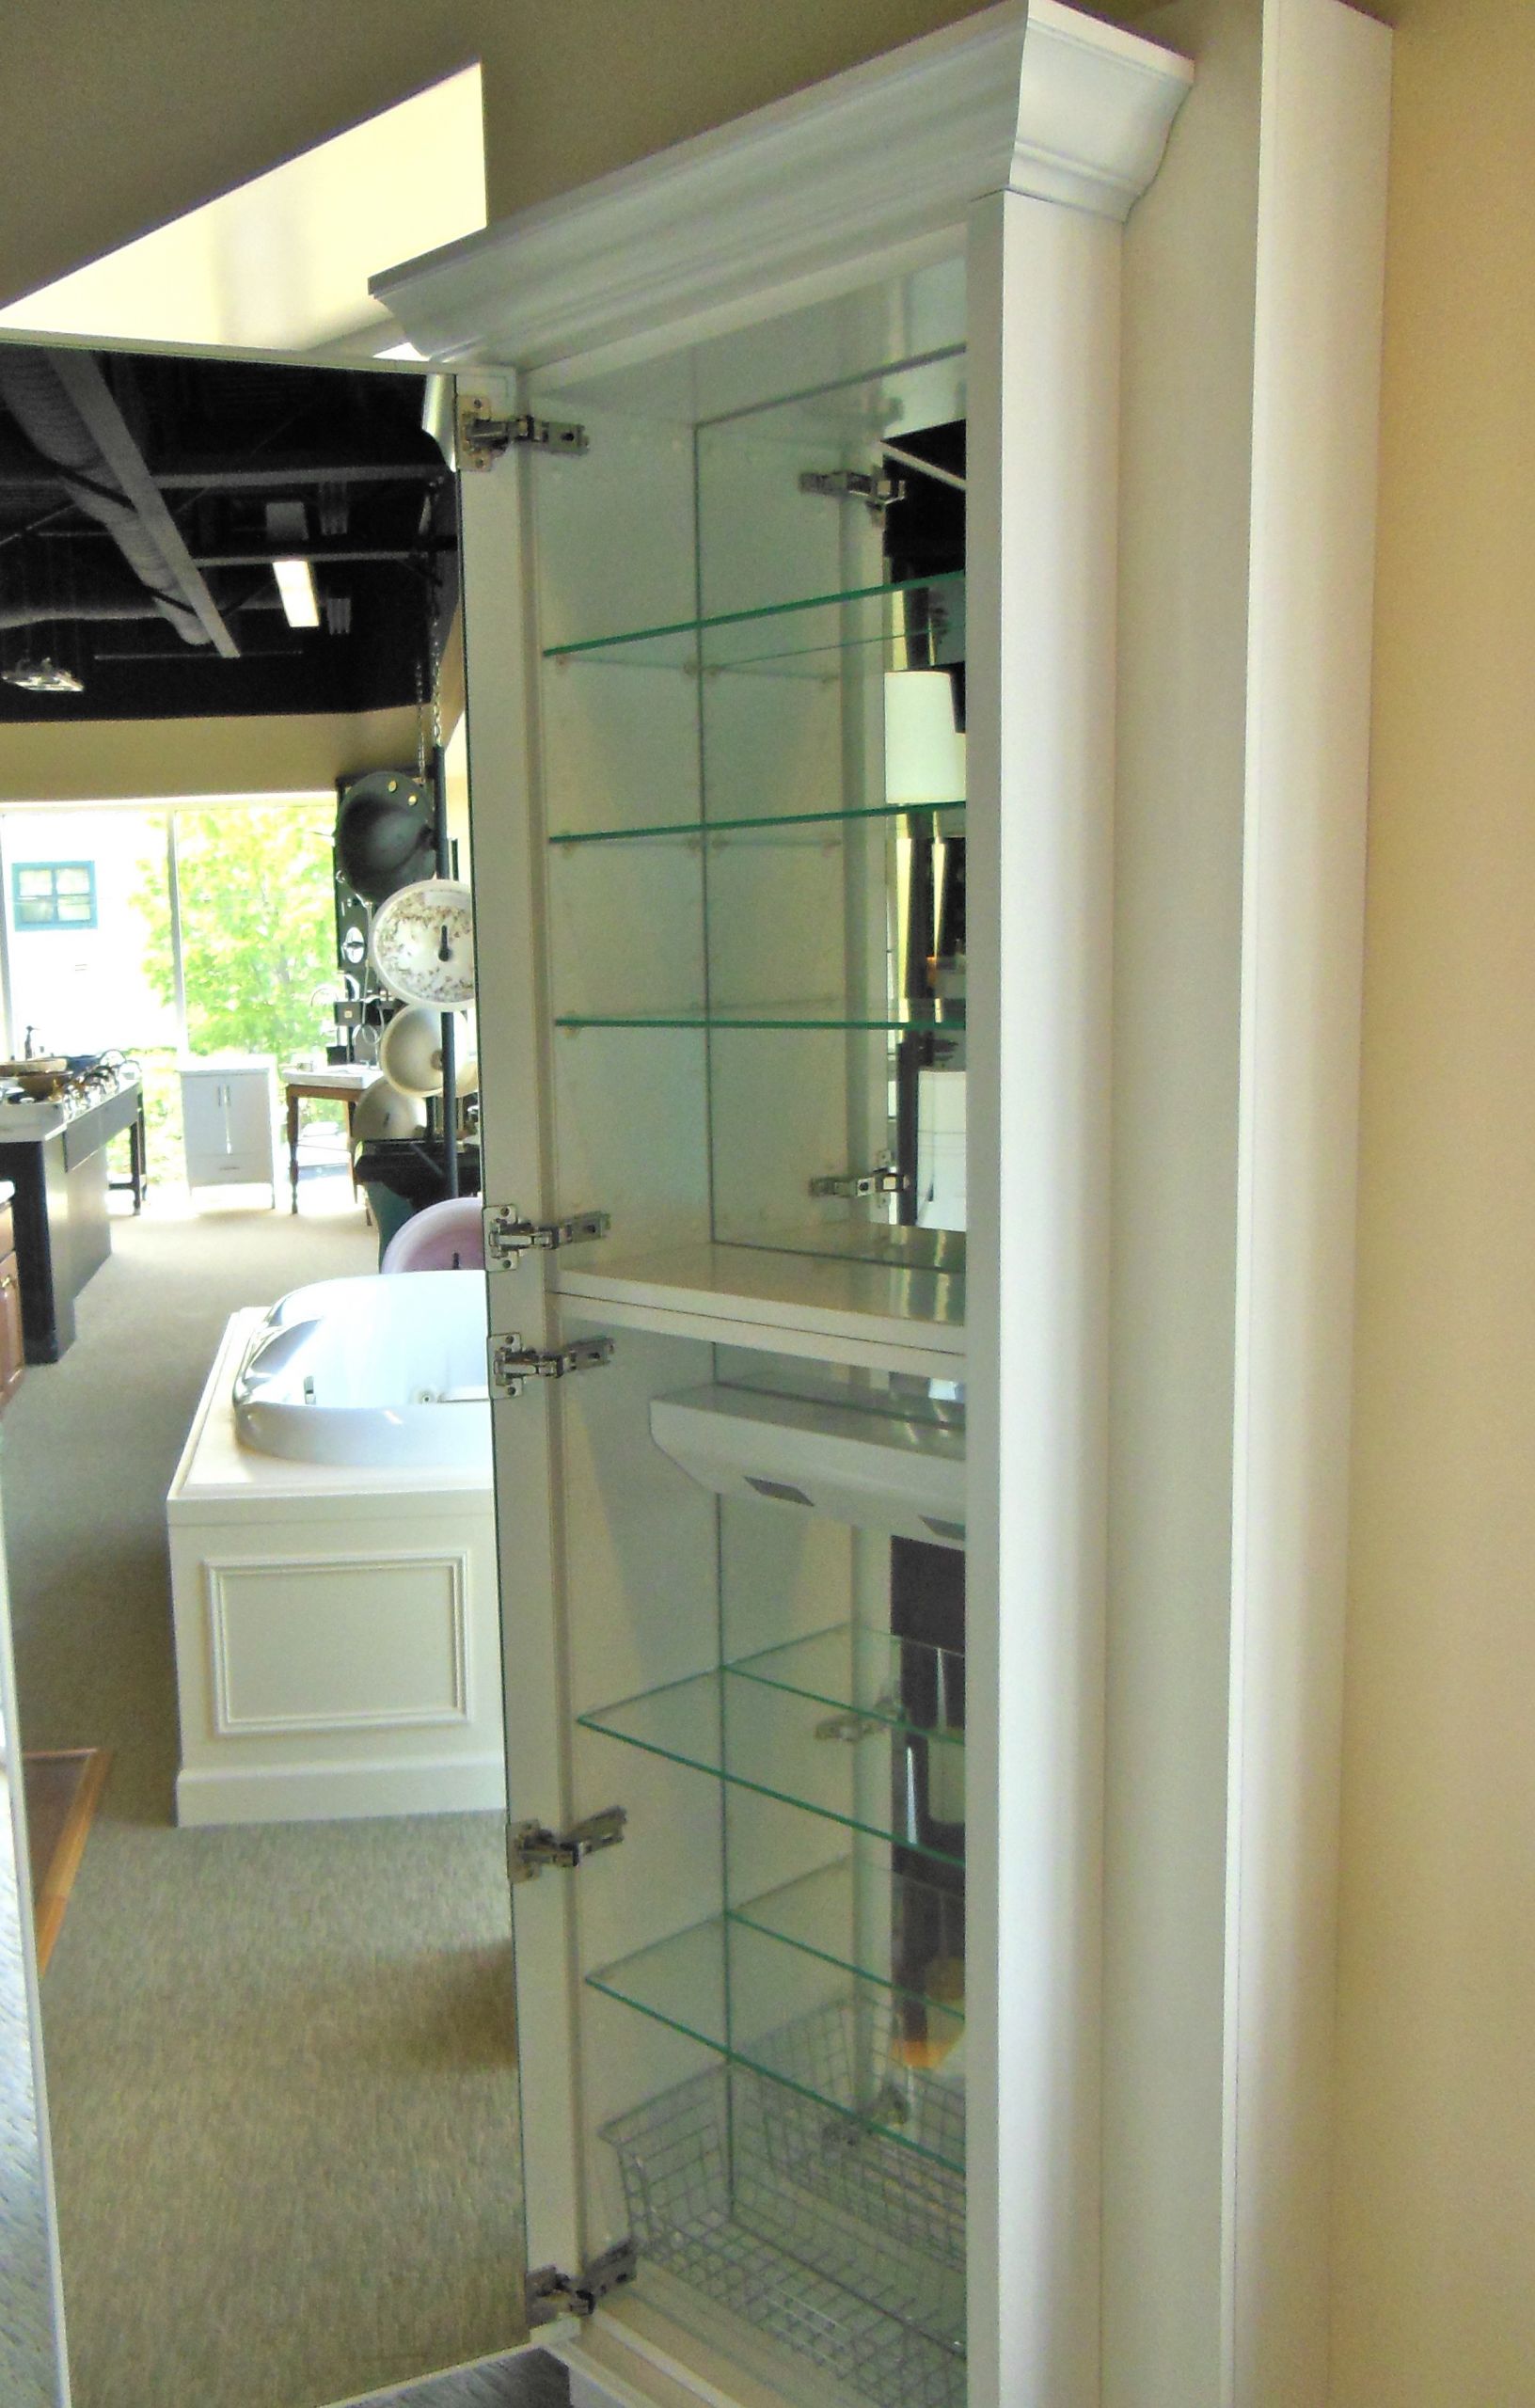 Large Bathroom Mirror Cabinet
 Love this x large medicine cabinet Designing our